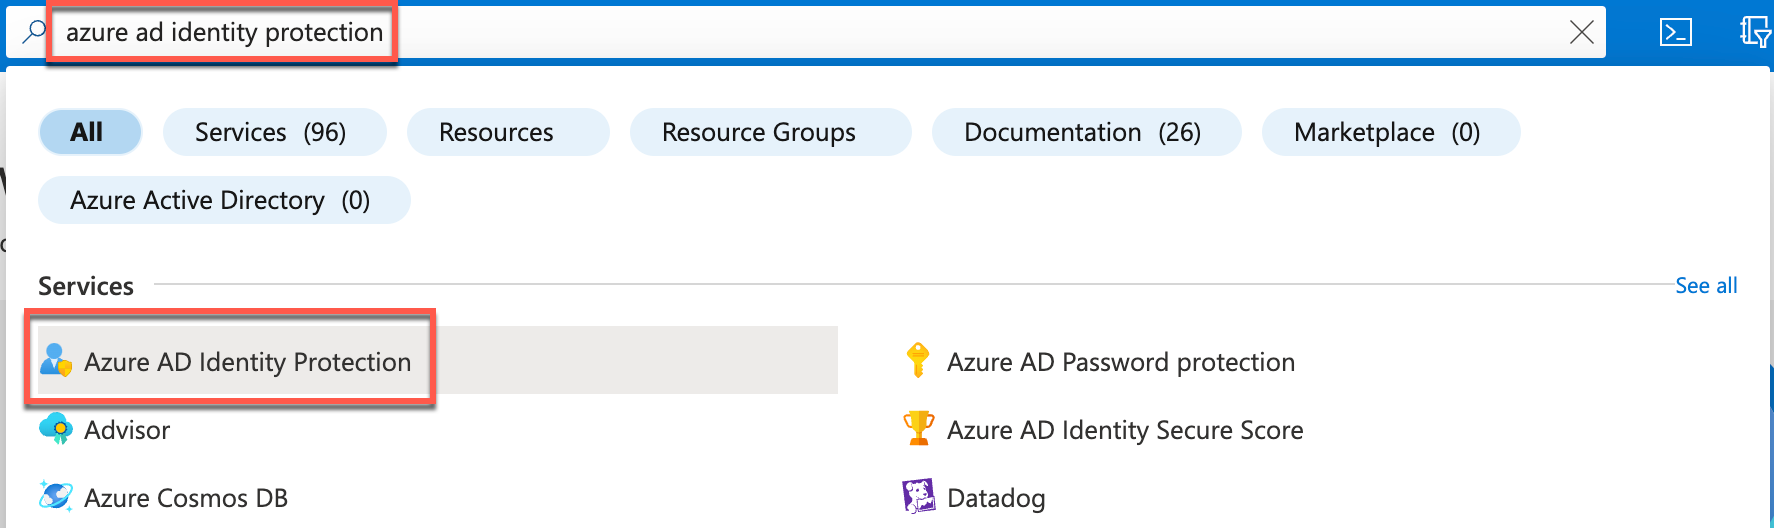 The Azure search at the top of the page displaying searching for and selecting azure ad identity protection.